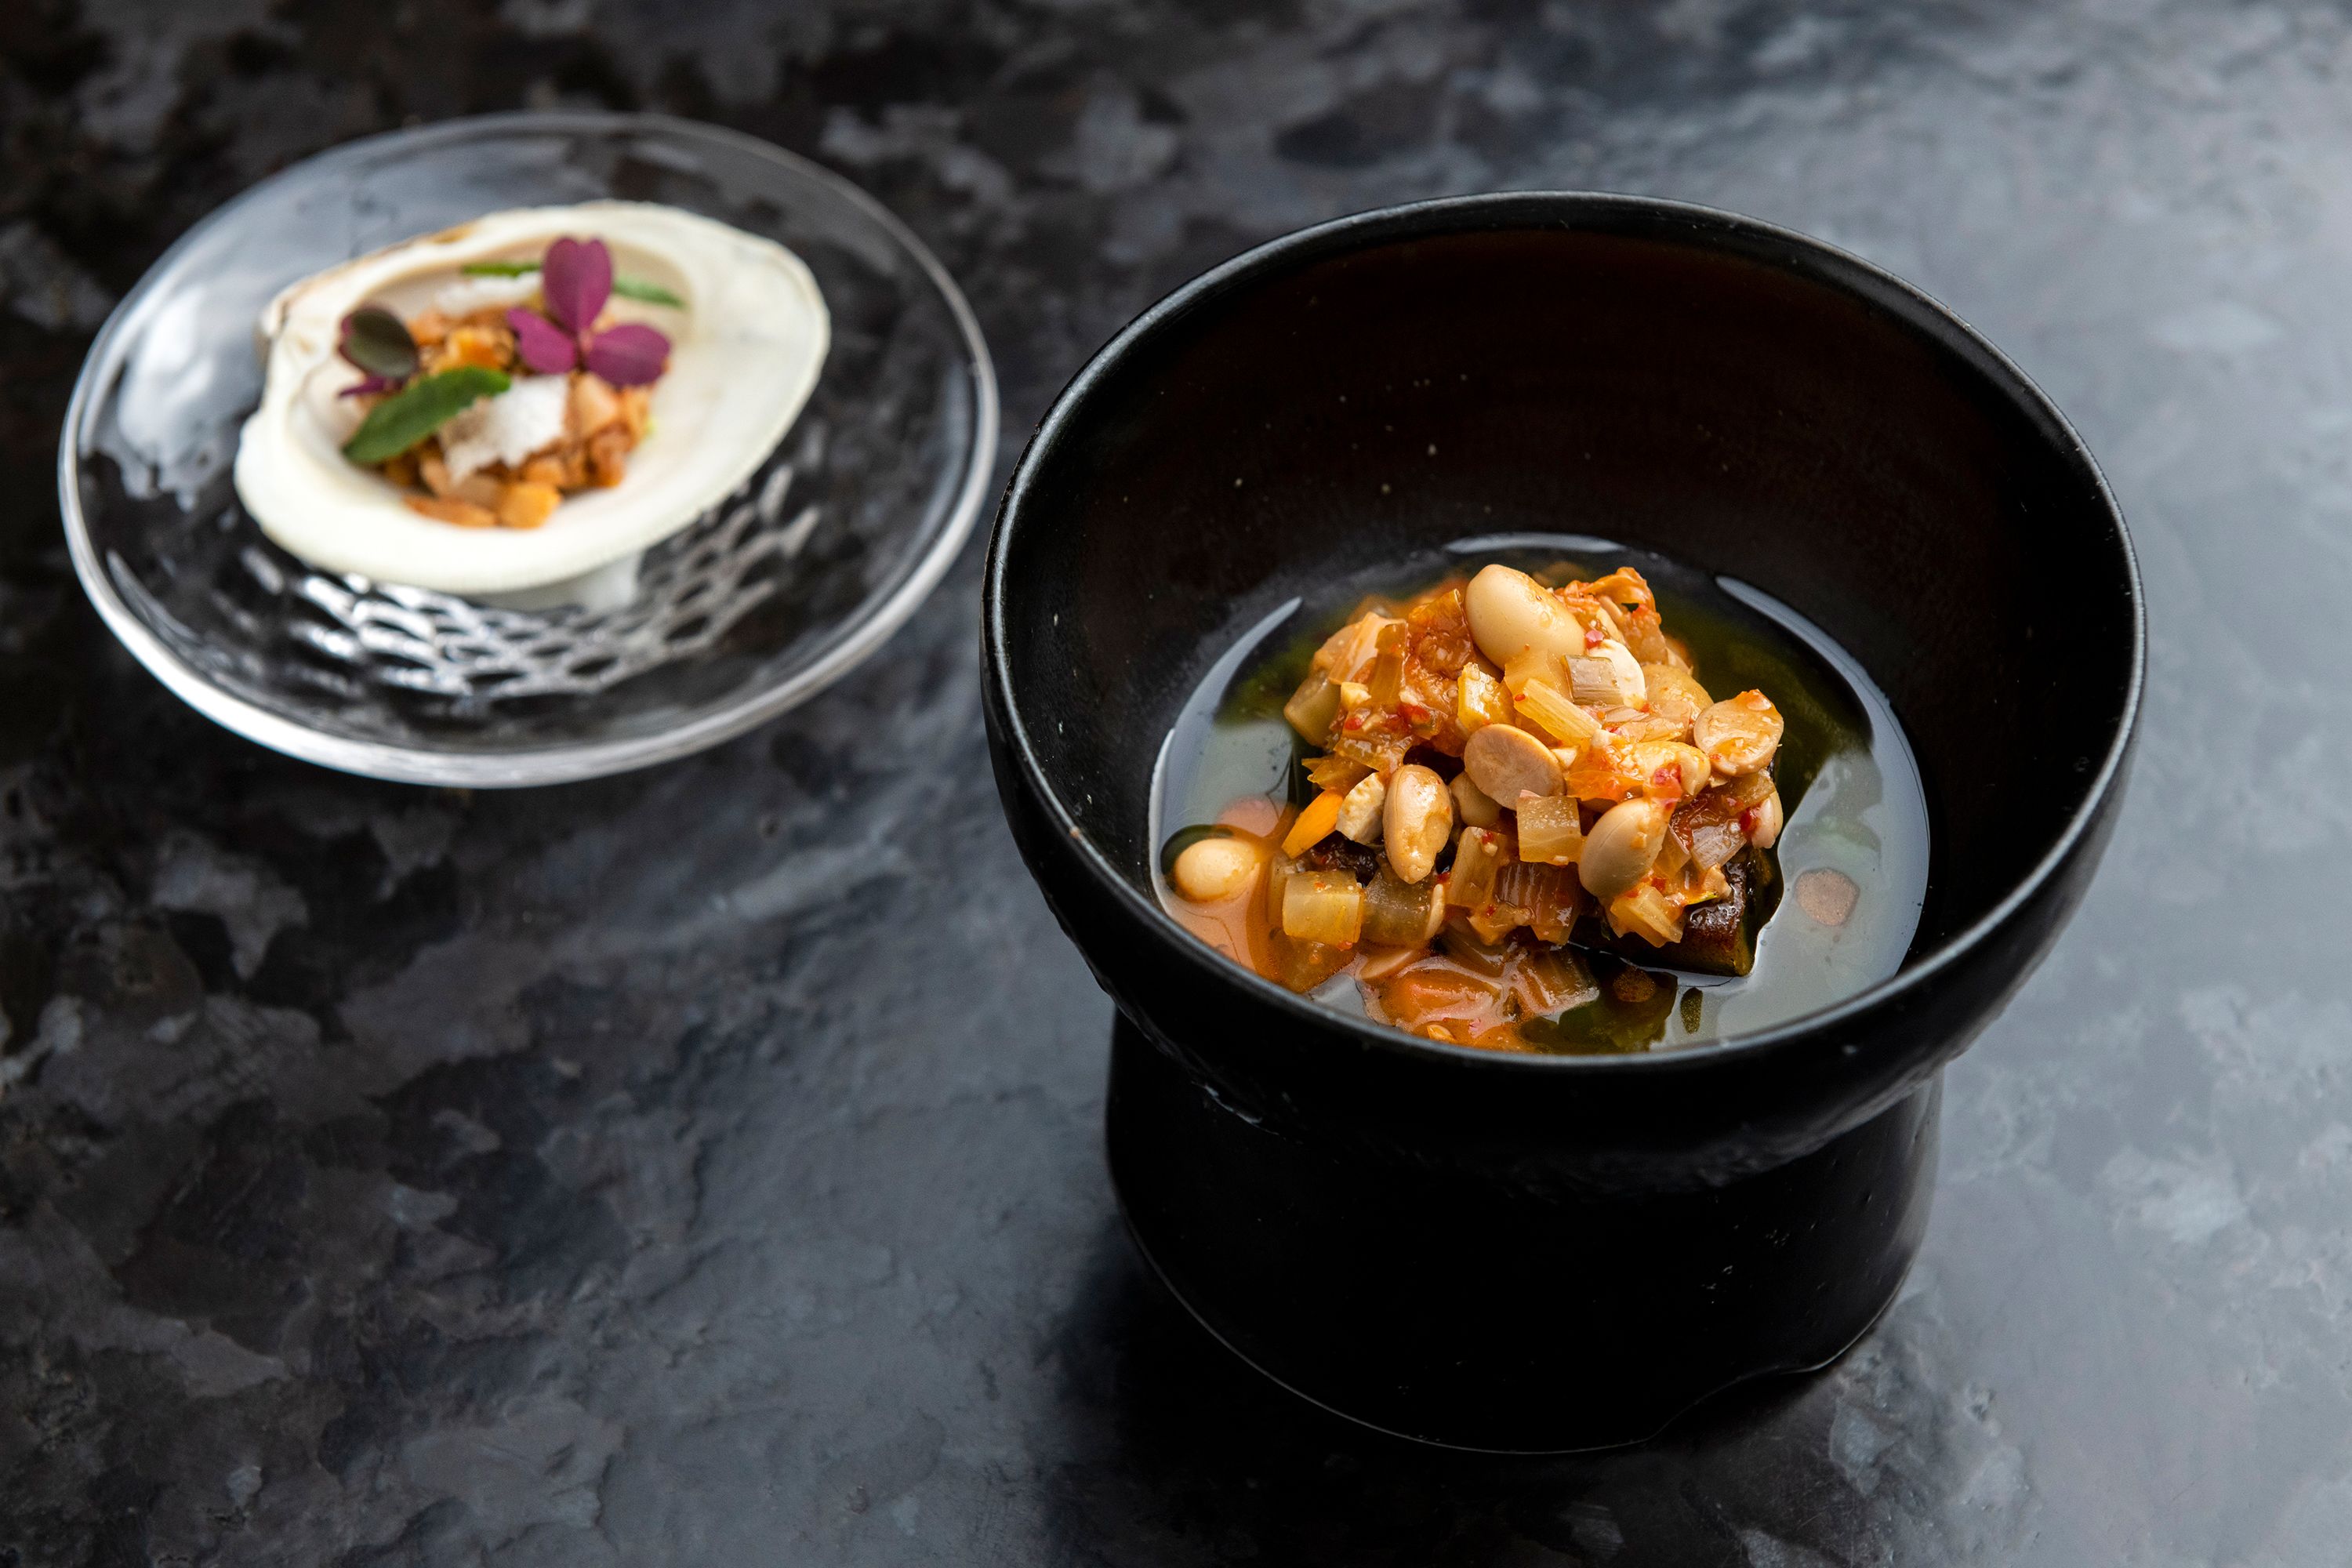 THE 10 BEST Restaurants in Ouro Fino (Updated November 2023)